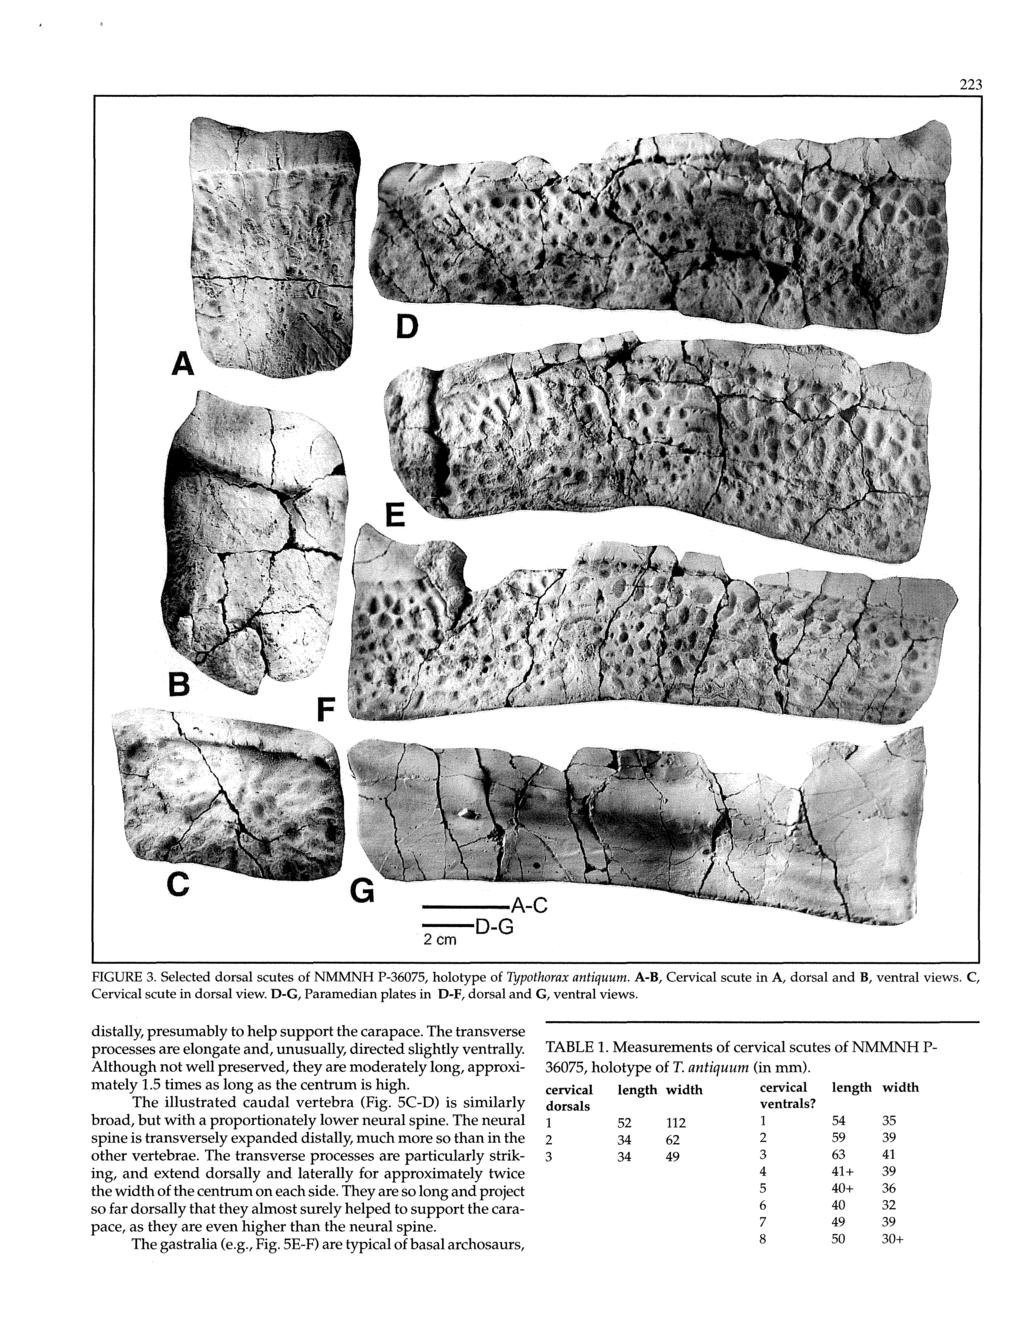 223 ---A-C --O-G 20m FGURE 3. Selected dorsal scutes of NMMNH P-36075, holotype of Typothorax aniiquum. A-B, Cervical scute in A, dorsal and B, ventral views. C, Cervical scute in dorsal view.